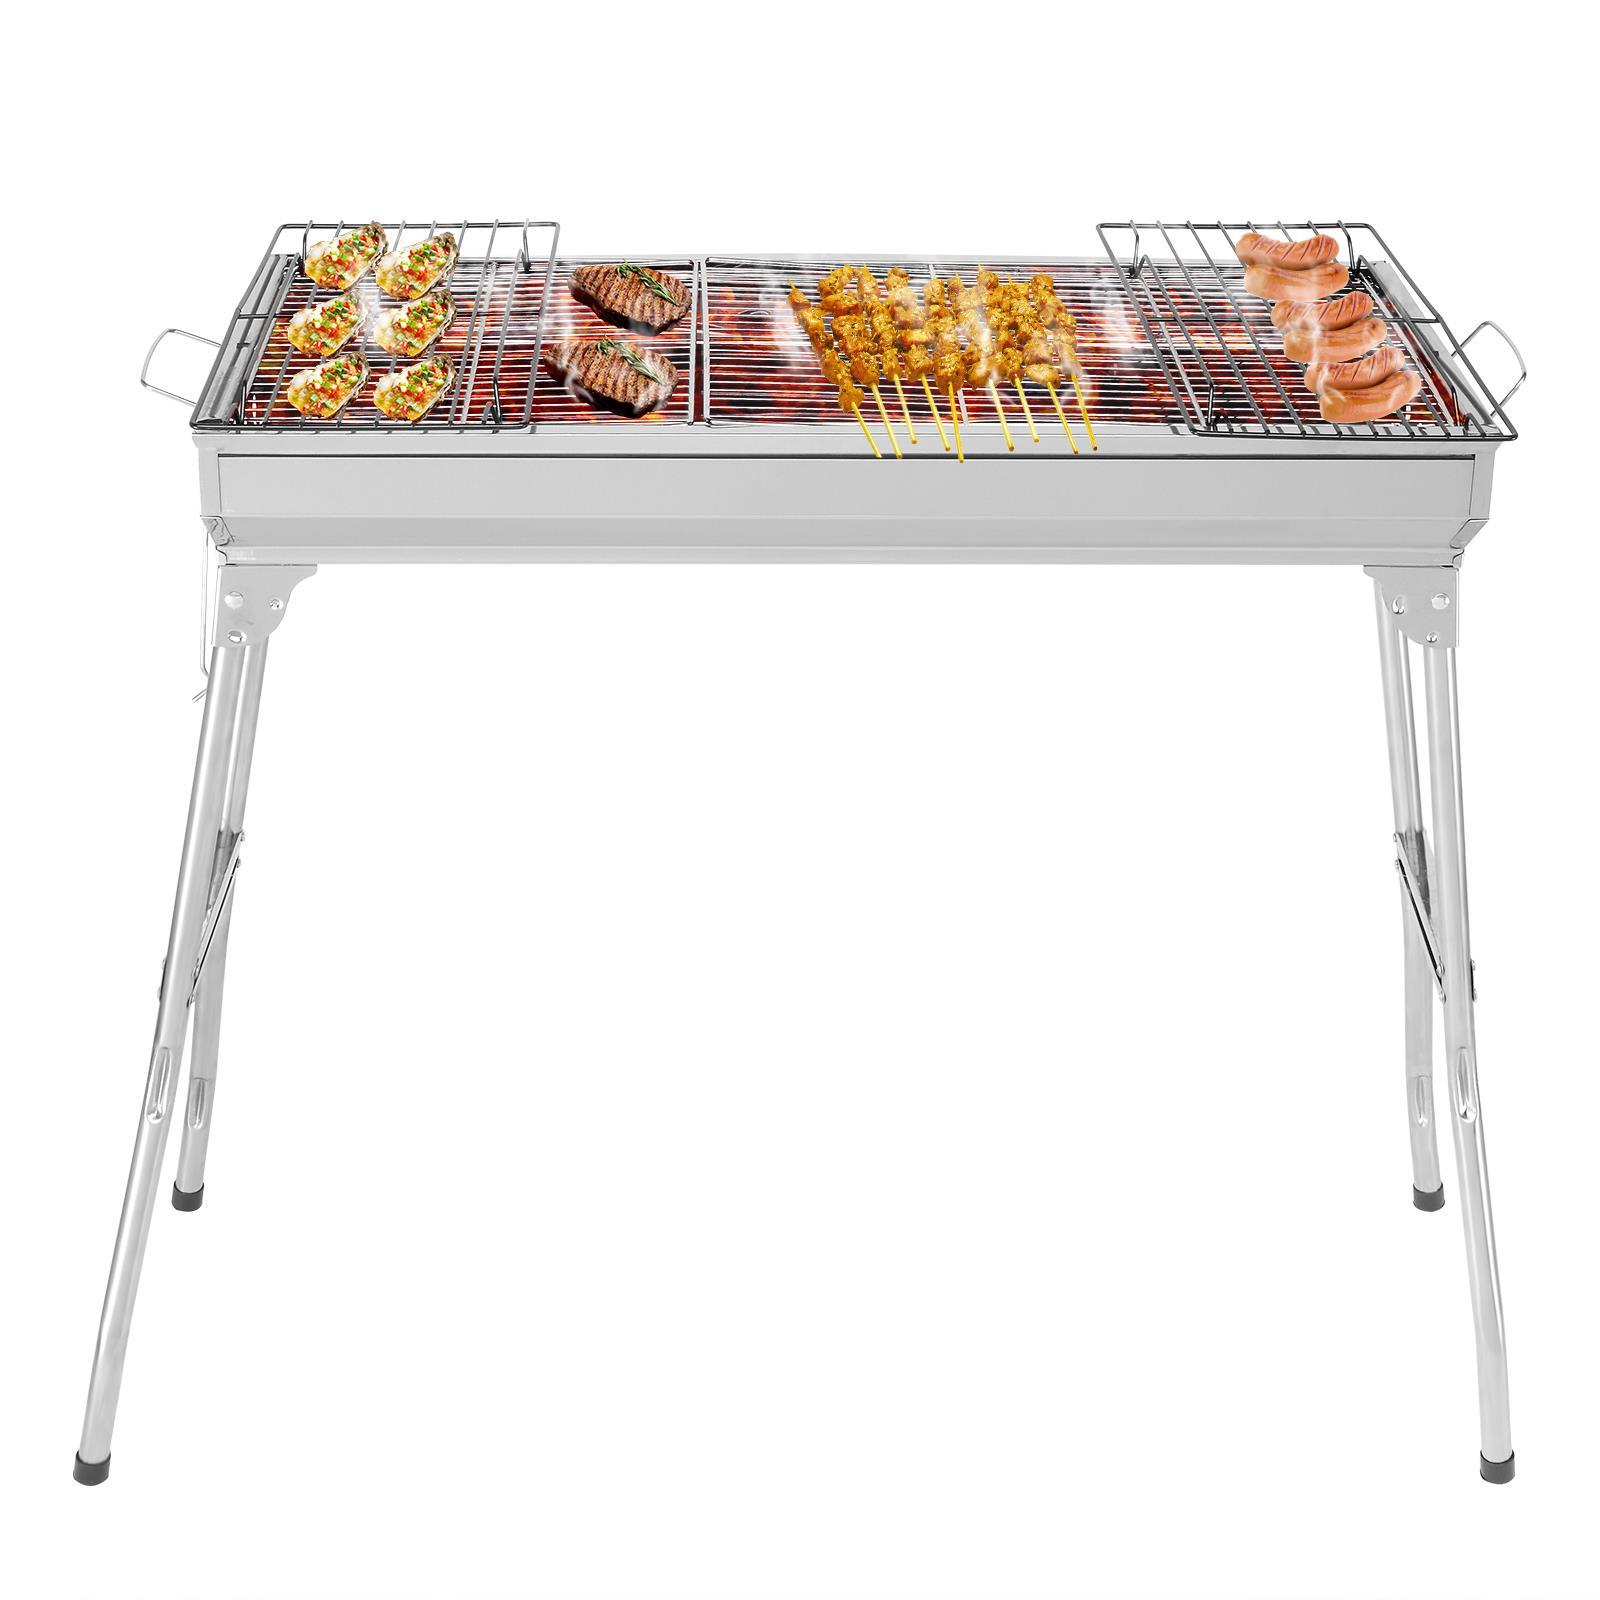 Stock Preferred BBQ Charcoal Grill Stainless Steel Fordable Backyard Cooking Silver 27.95x12.99x27.56"